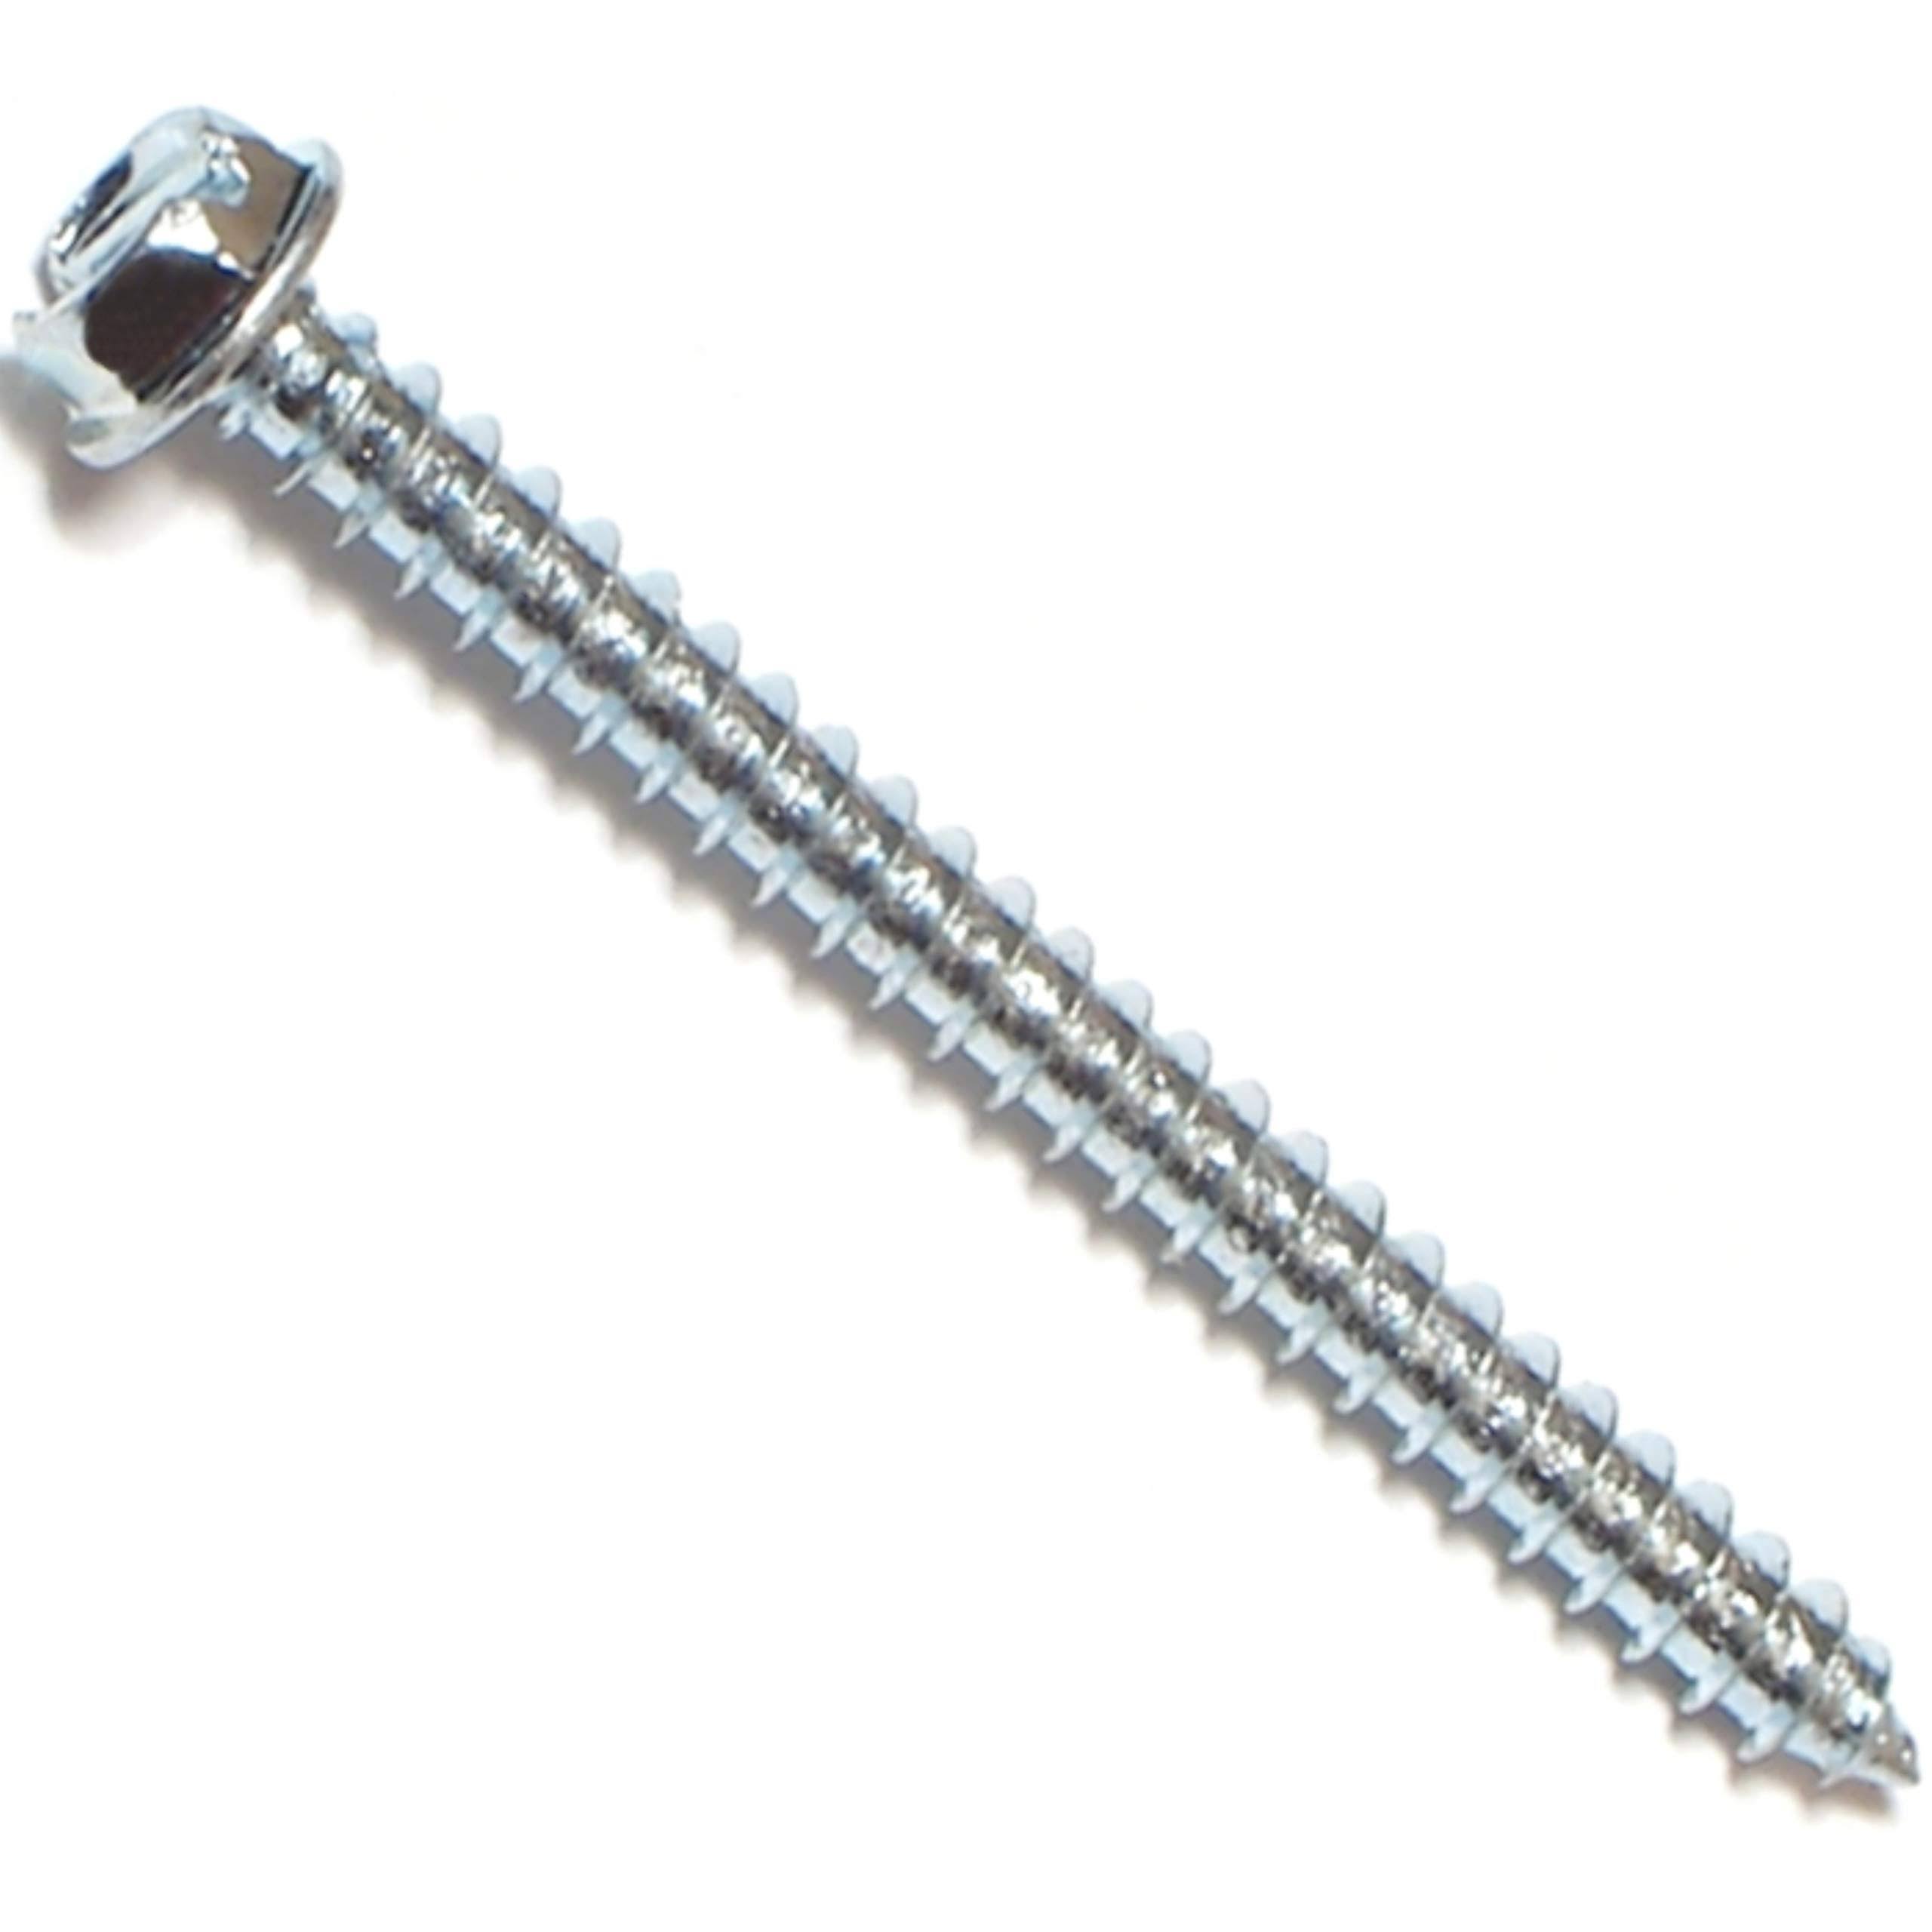 Midwest Products Slotted Hex Washer Head Screw - 2"